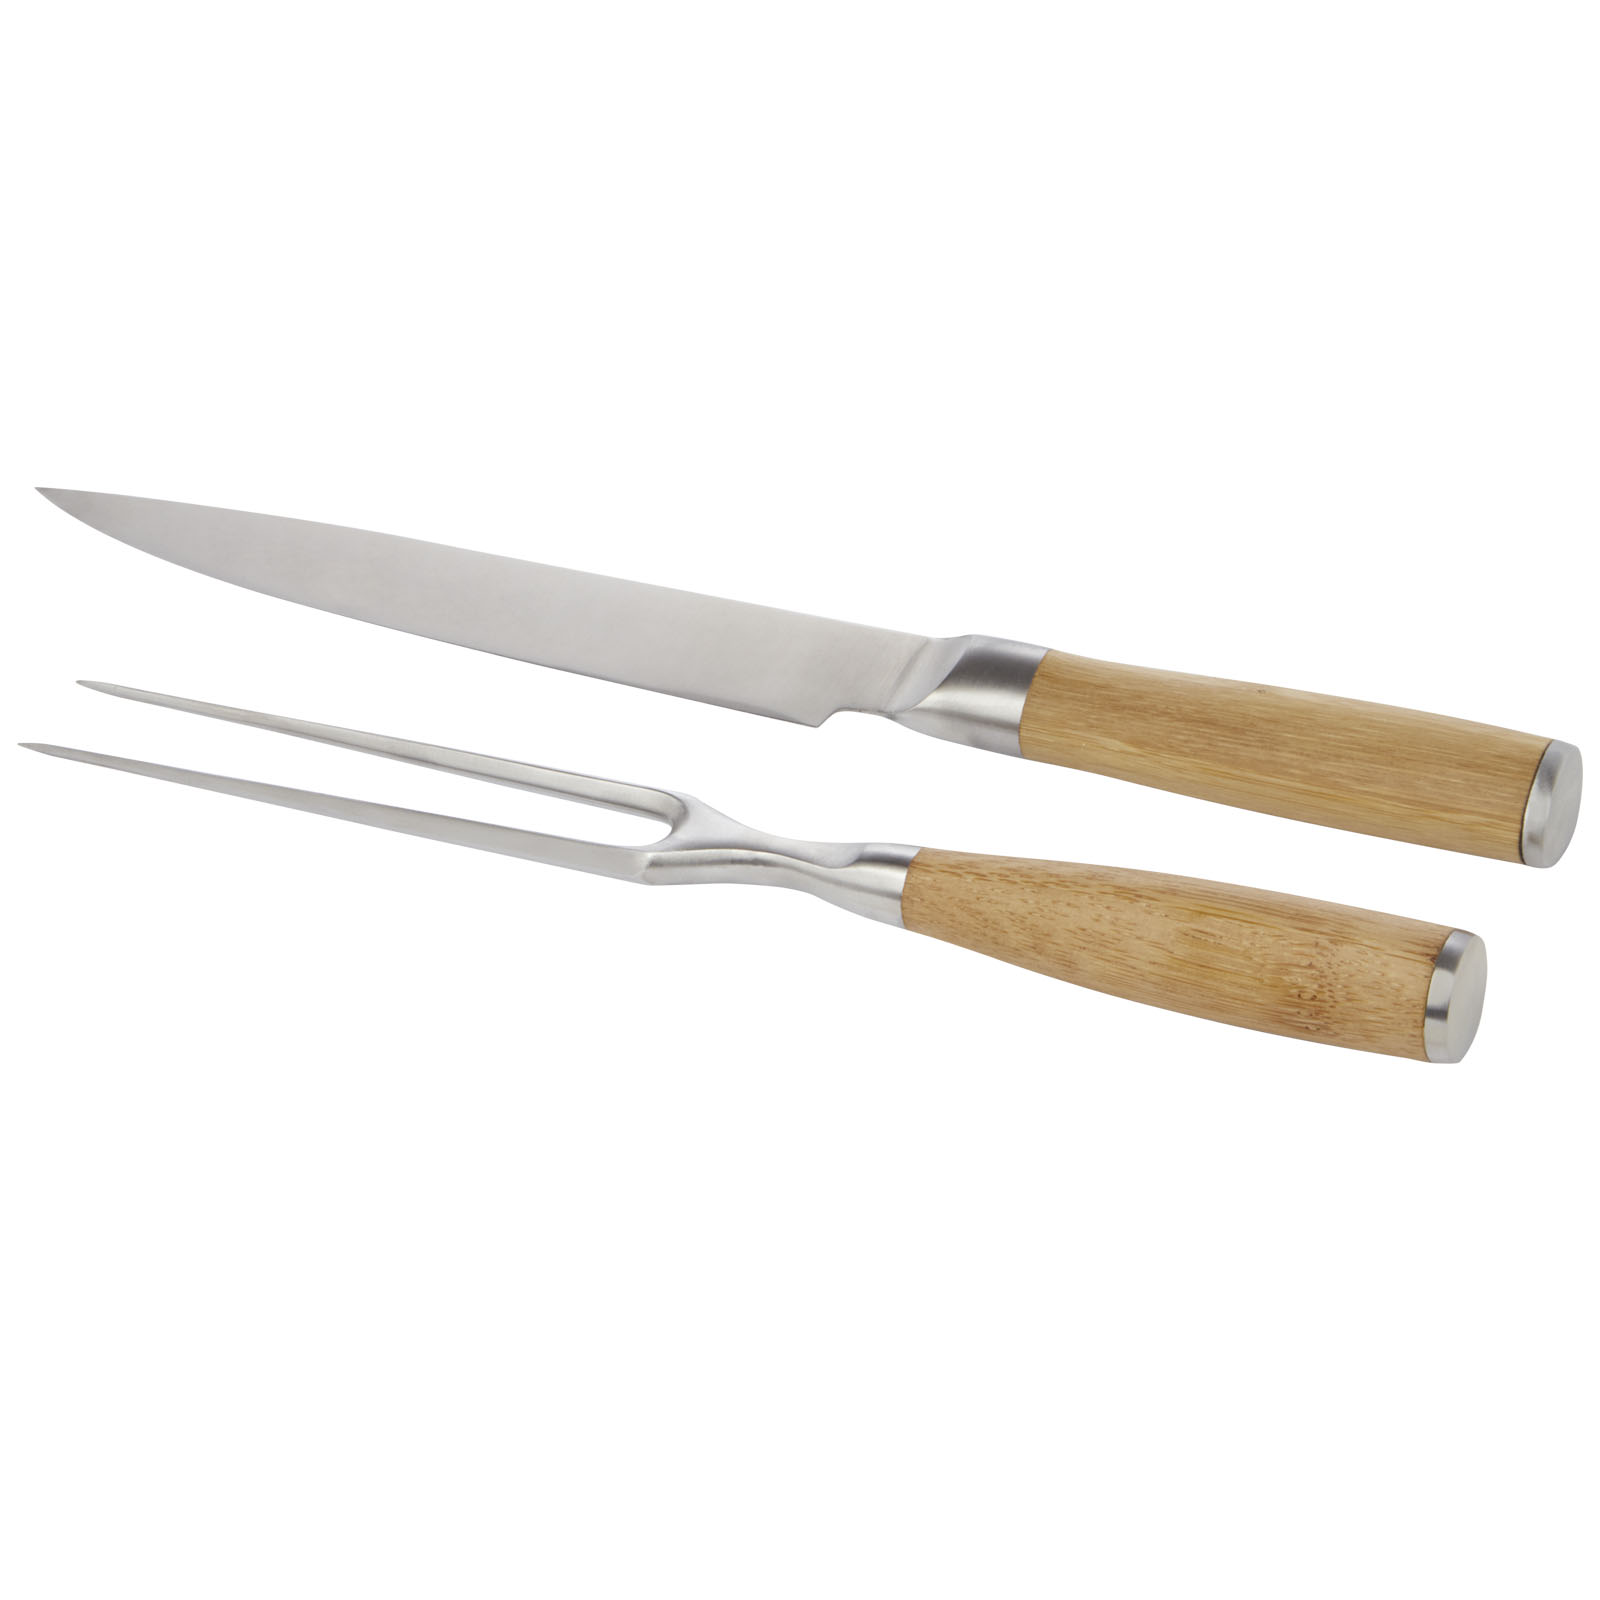 Sustainable Bamboo Handled Carving Knife and Fork Set - Wantage